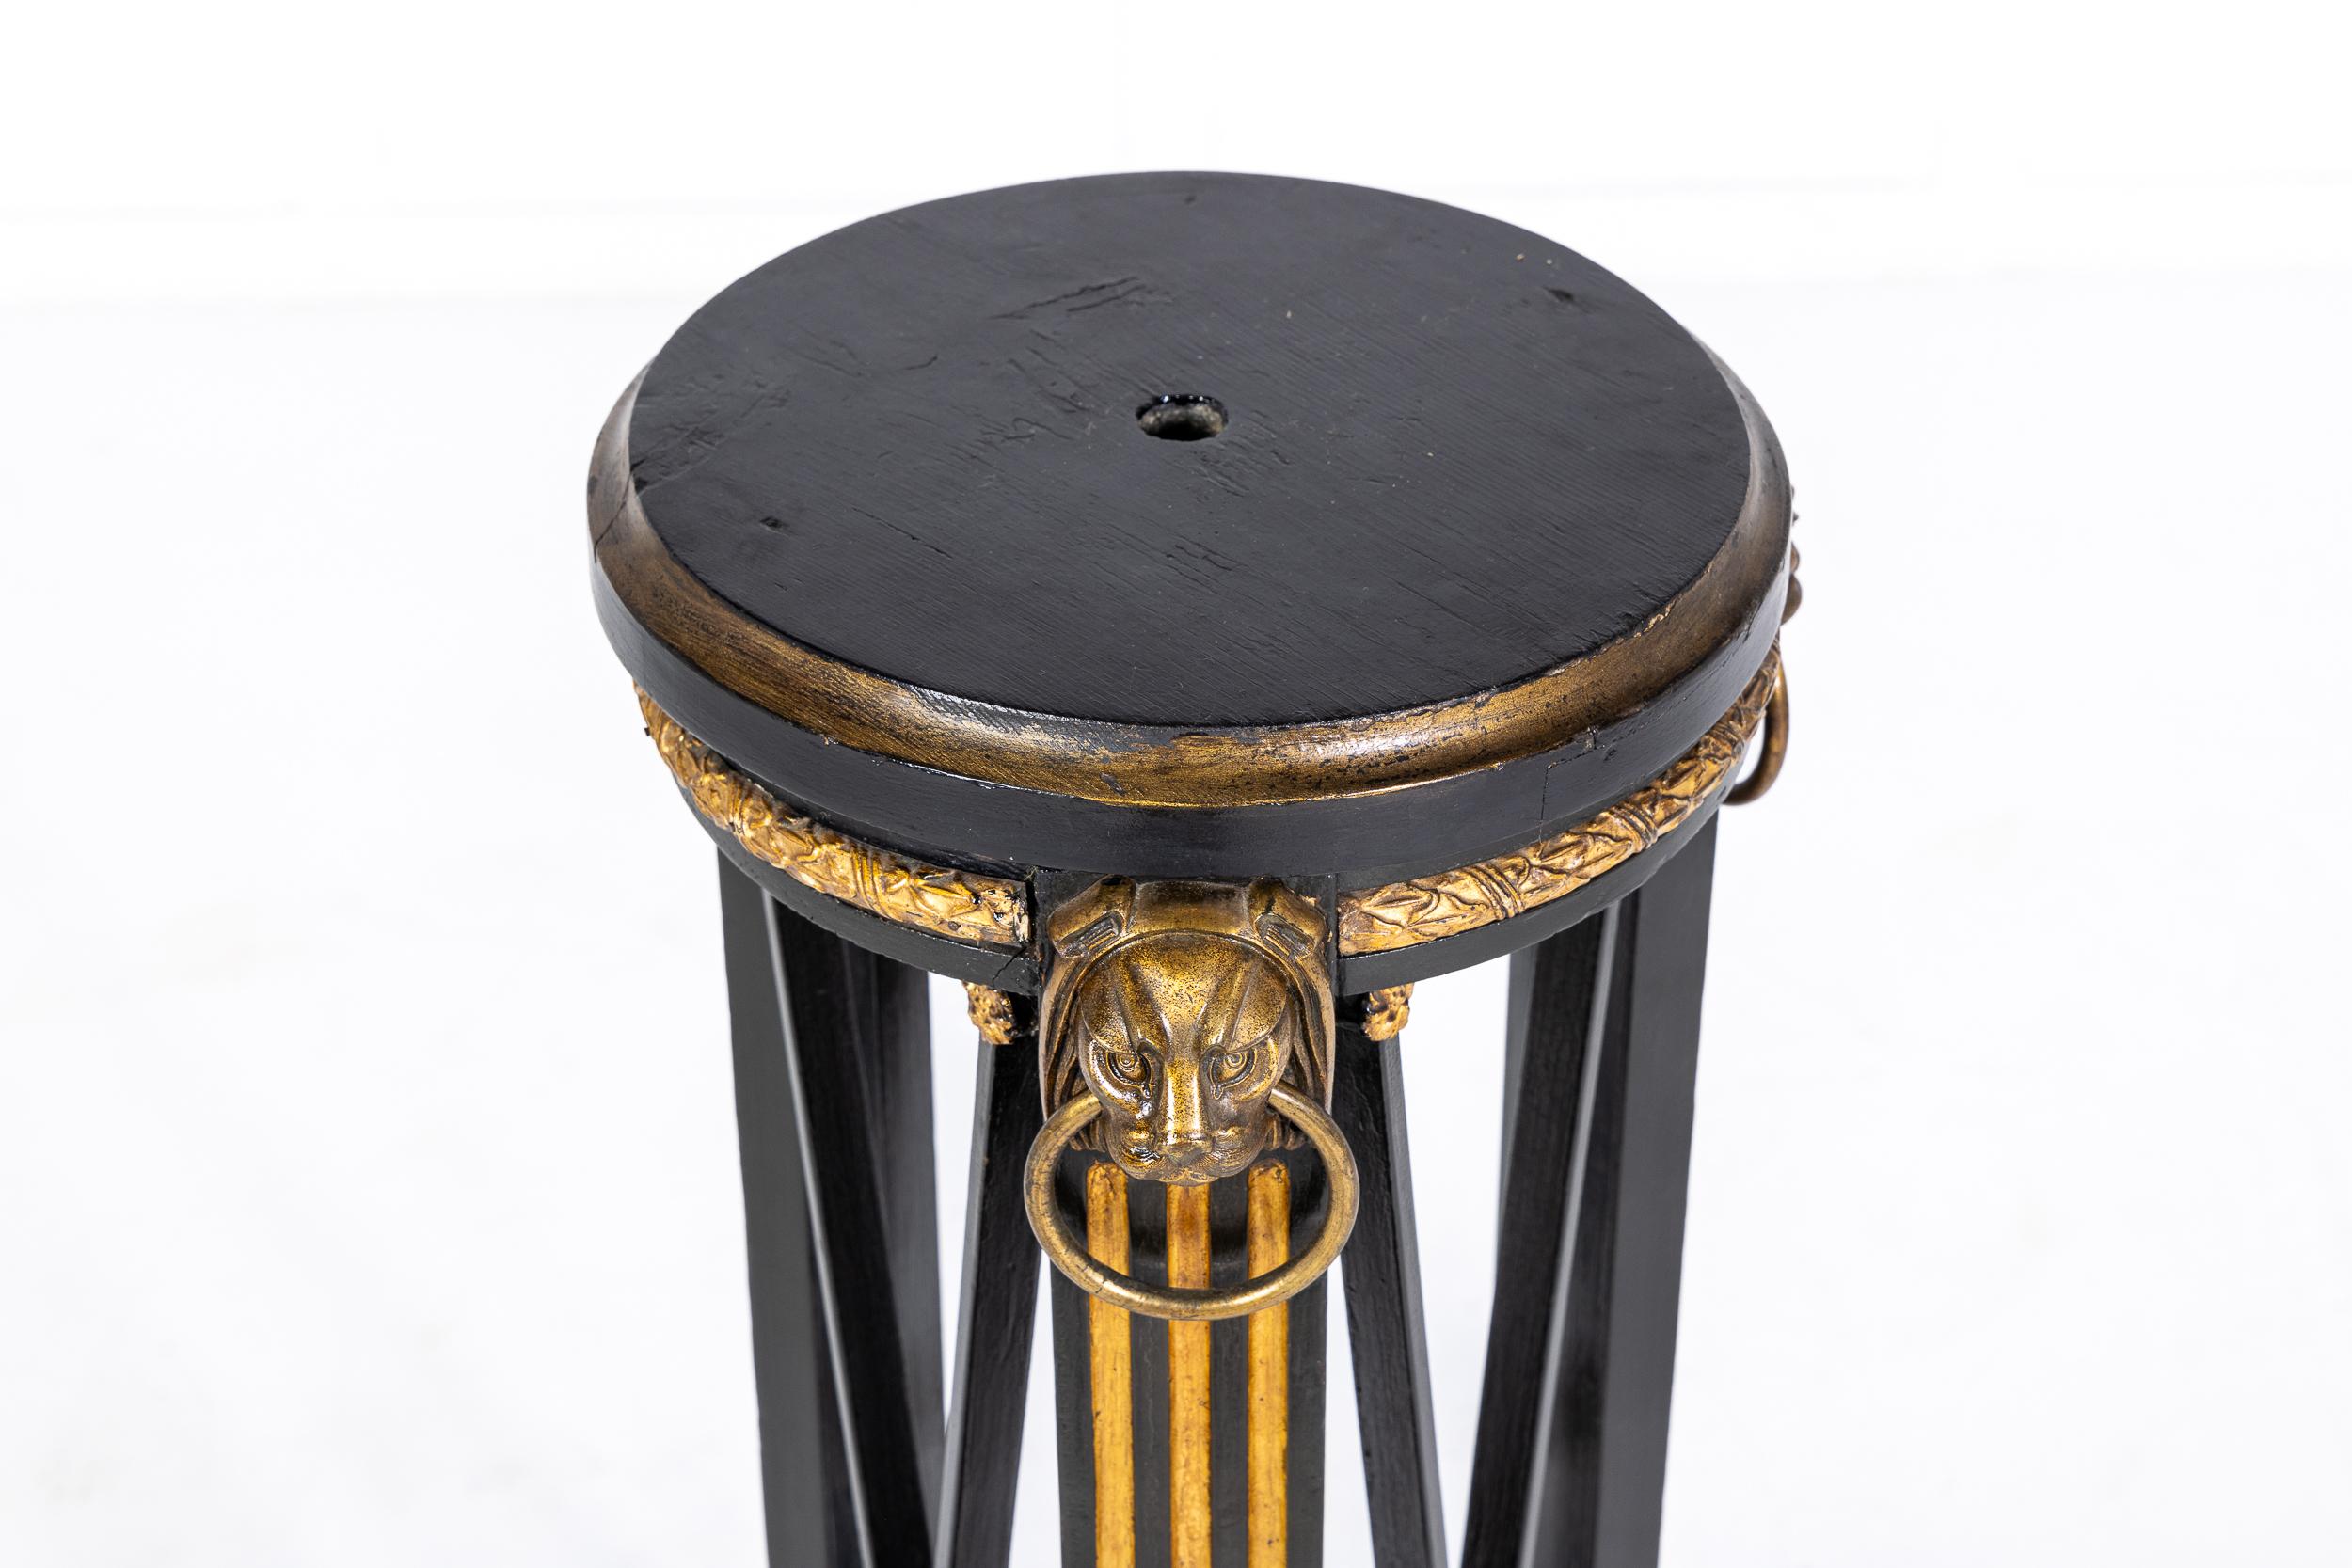 An interesting gilt metal and ebonised torchère or stand in the manner of Thomas Hope, English c.1910

The torchère of triangular form but with a circular top, mounted throughout with gilt metal including the finely cast feet, the lion mask handles